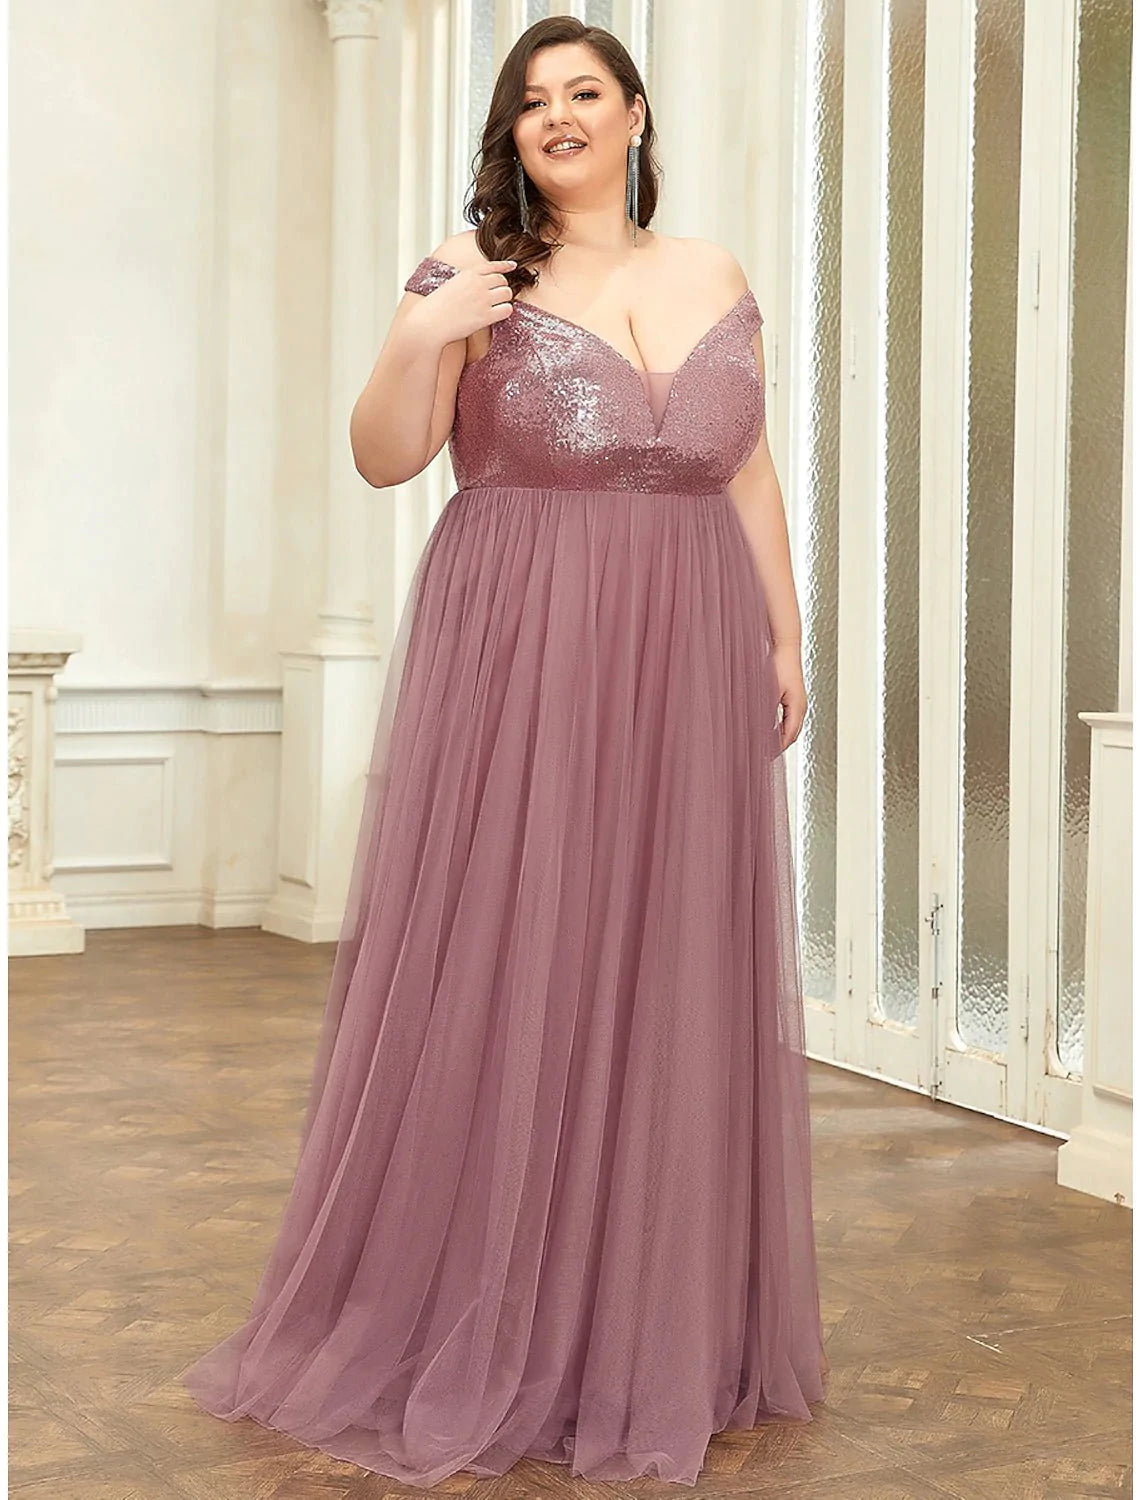 Bridesmaid Dress V Neck Sleeveless Elegant Floor Length Tulle / Sequined with Draping / Tier / Solid Color - RongMoon